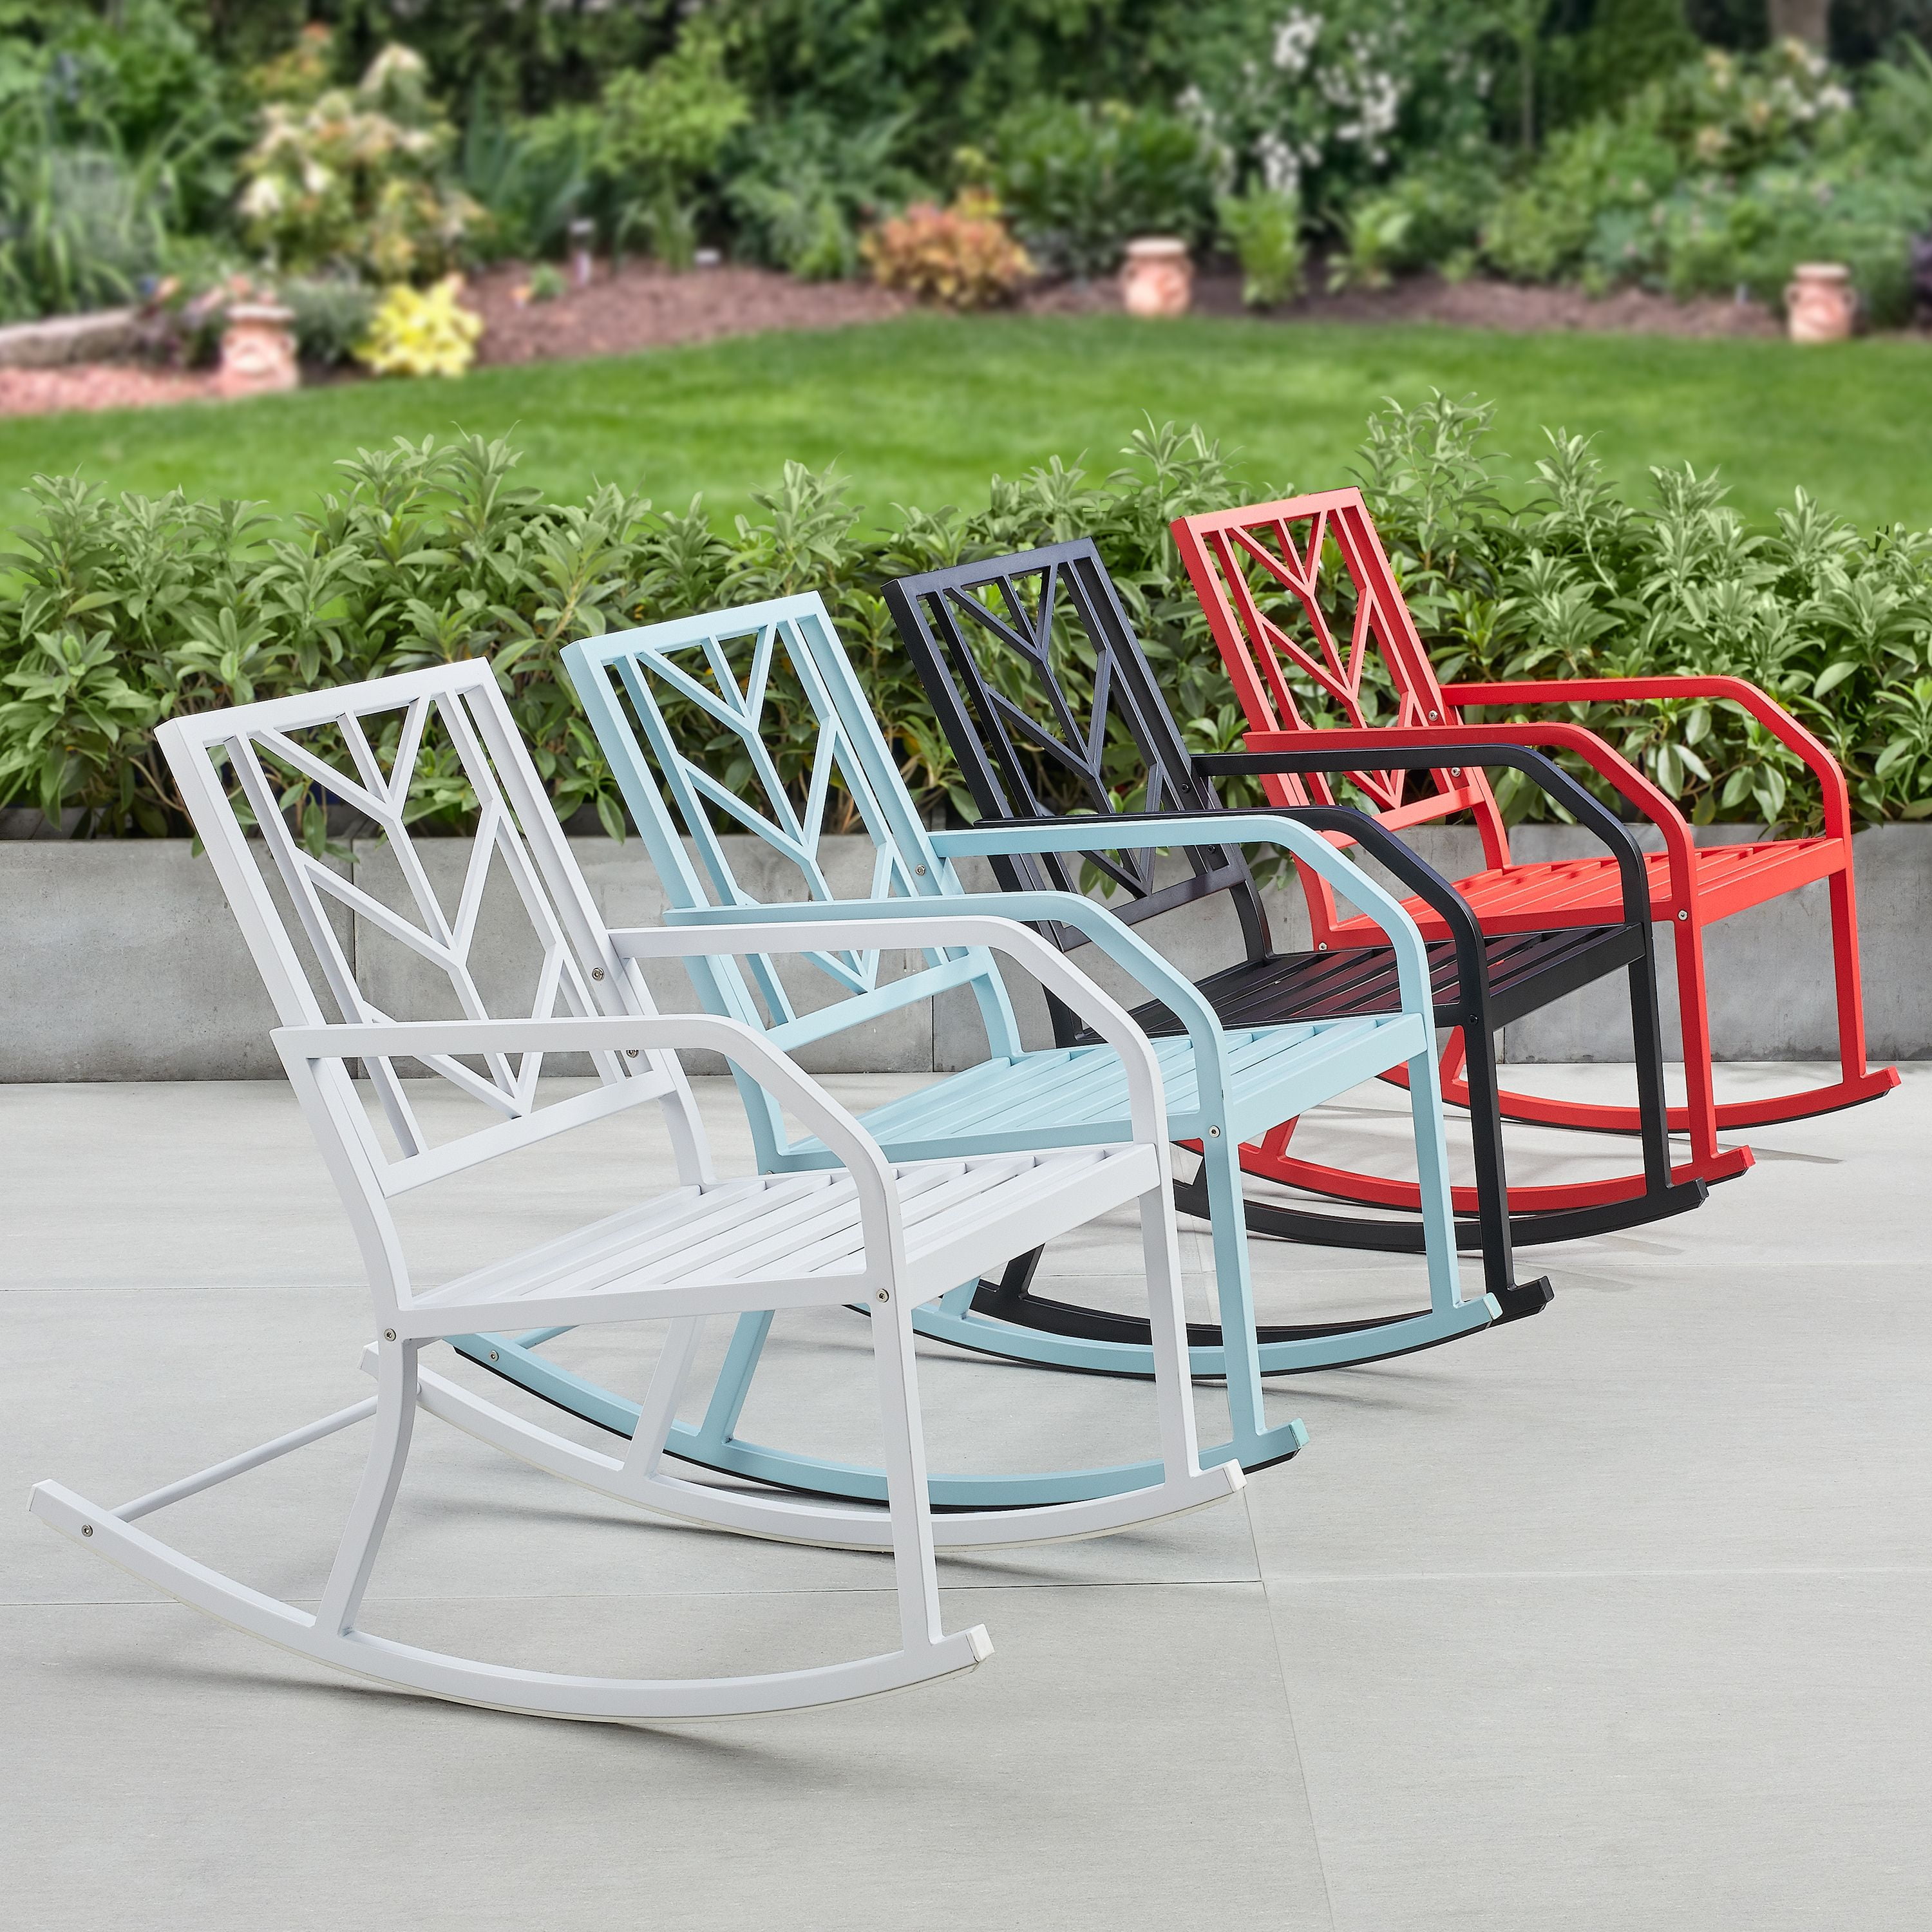 White Mainstays Outdoor Rocking Chair